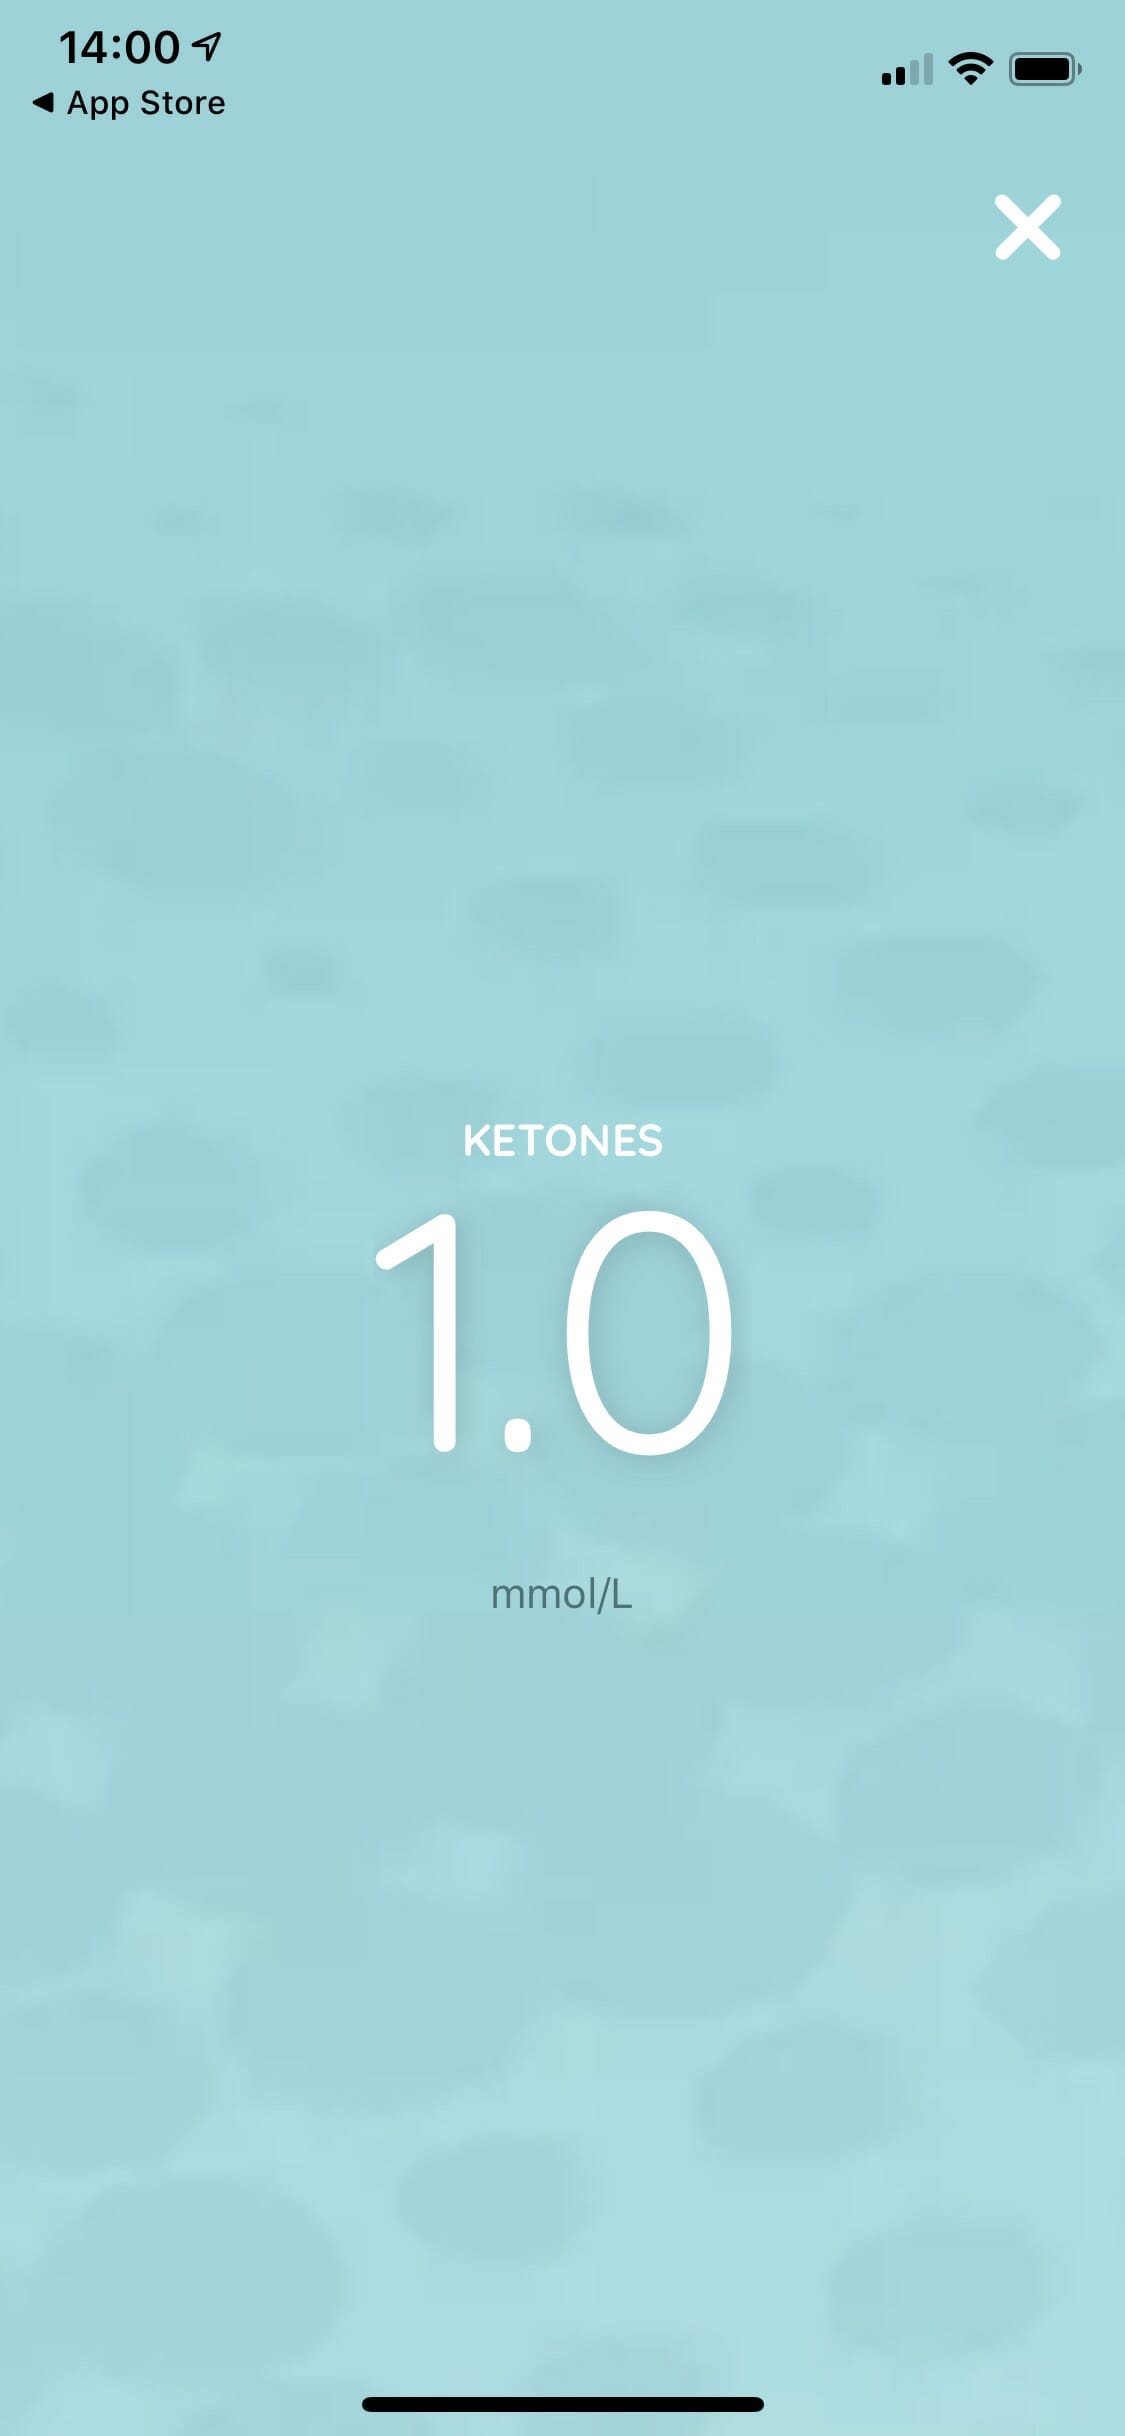 My blood ketone levels before starting the test.